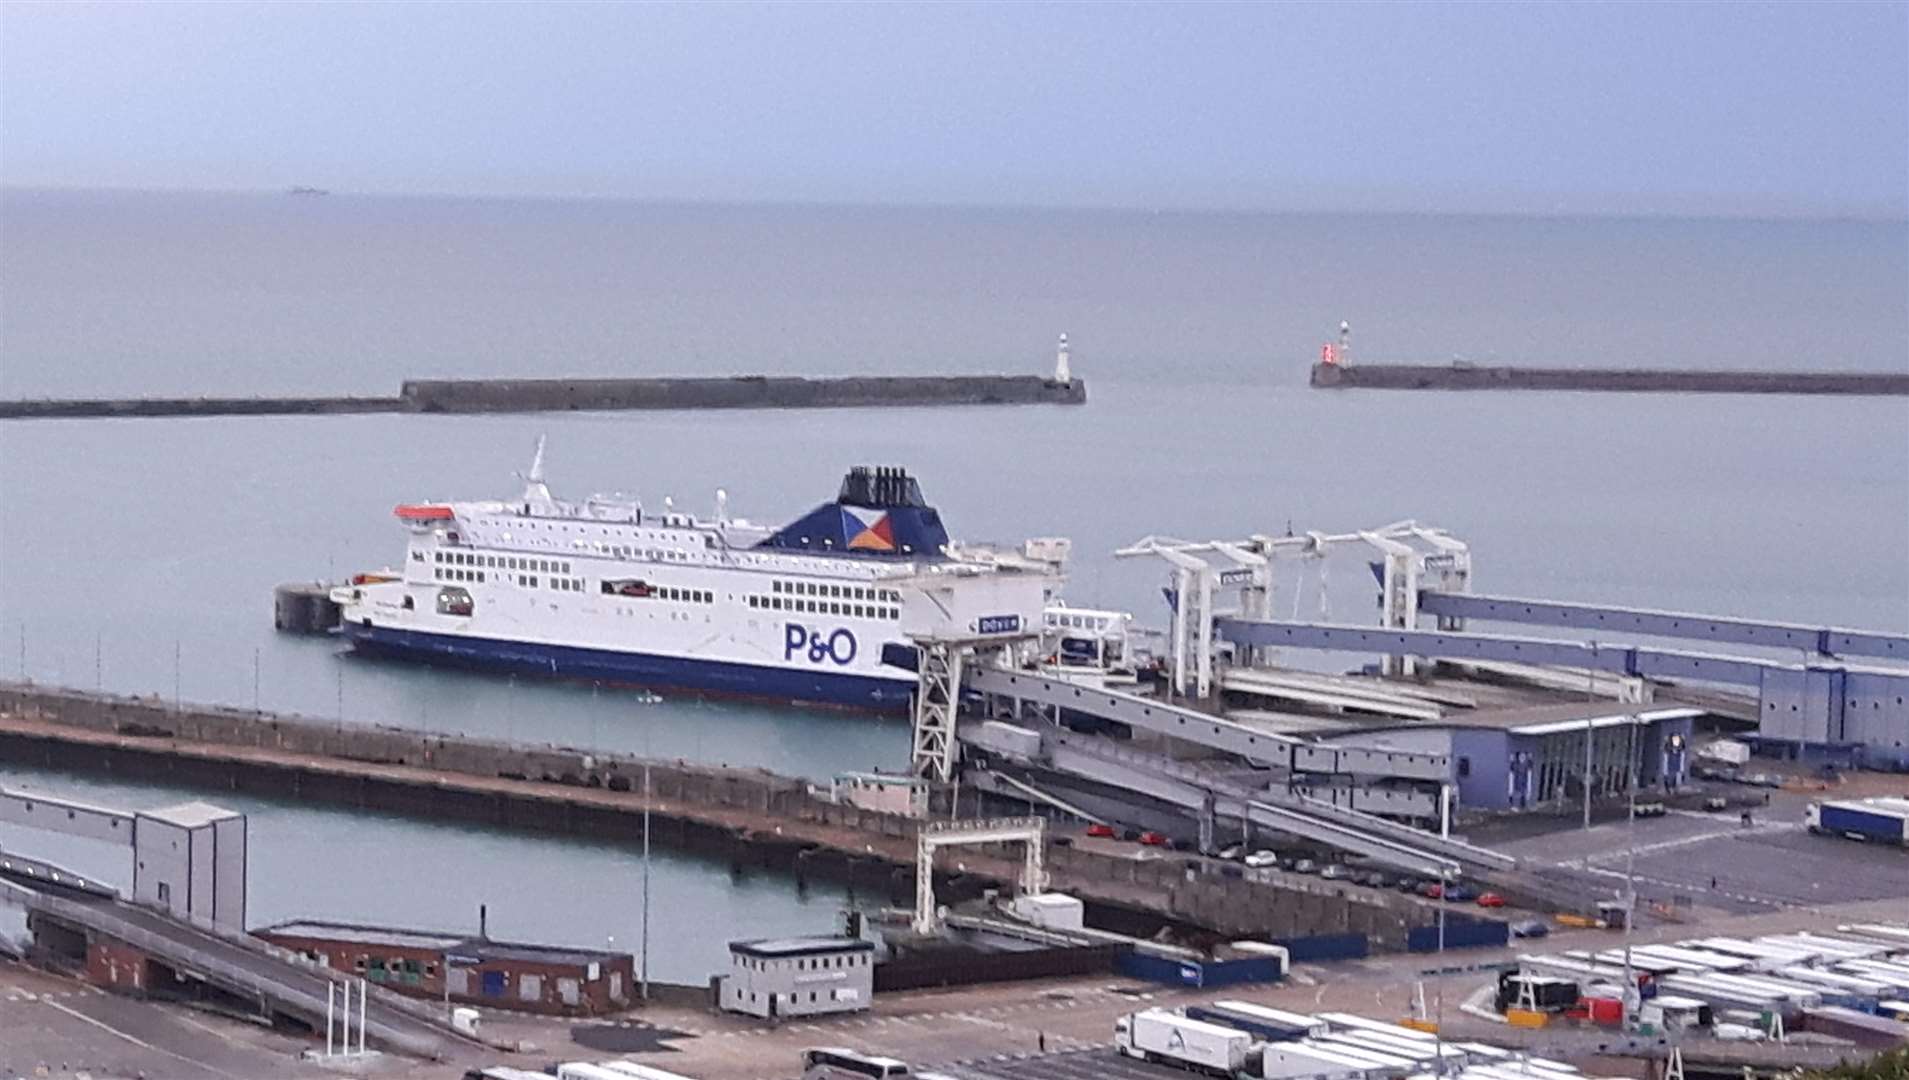 P&O ferries at Dover Eastern Docks